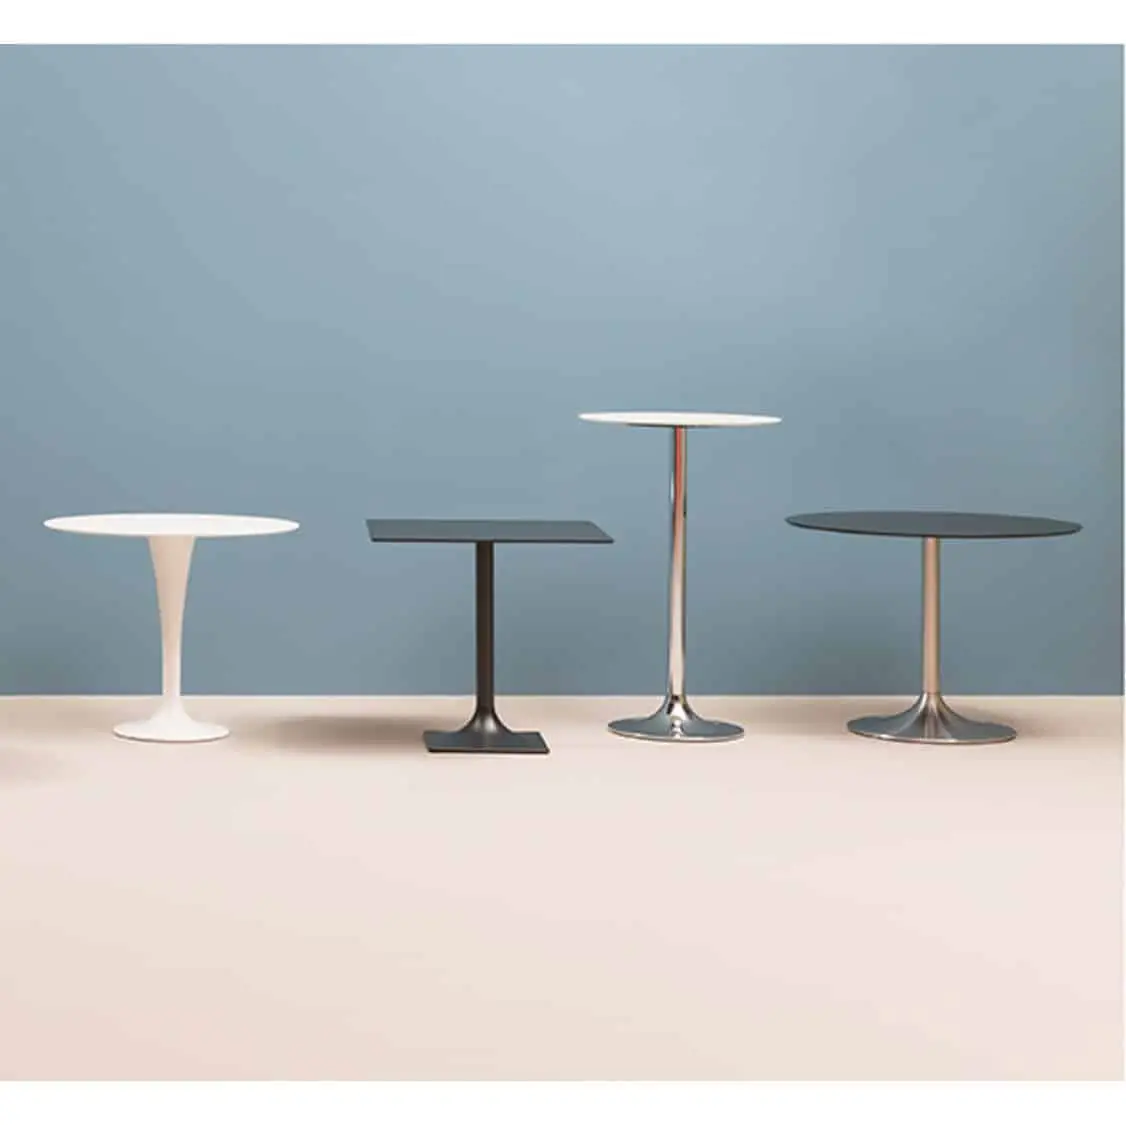 Zeus Brass Table Base - DeFrae Contract Furniture